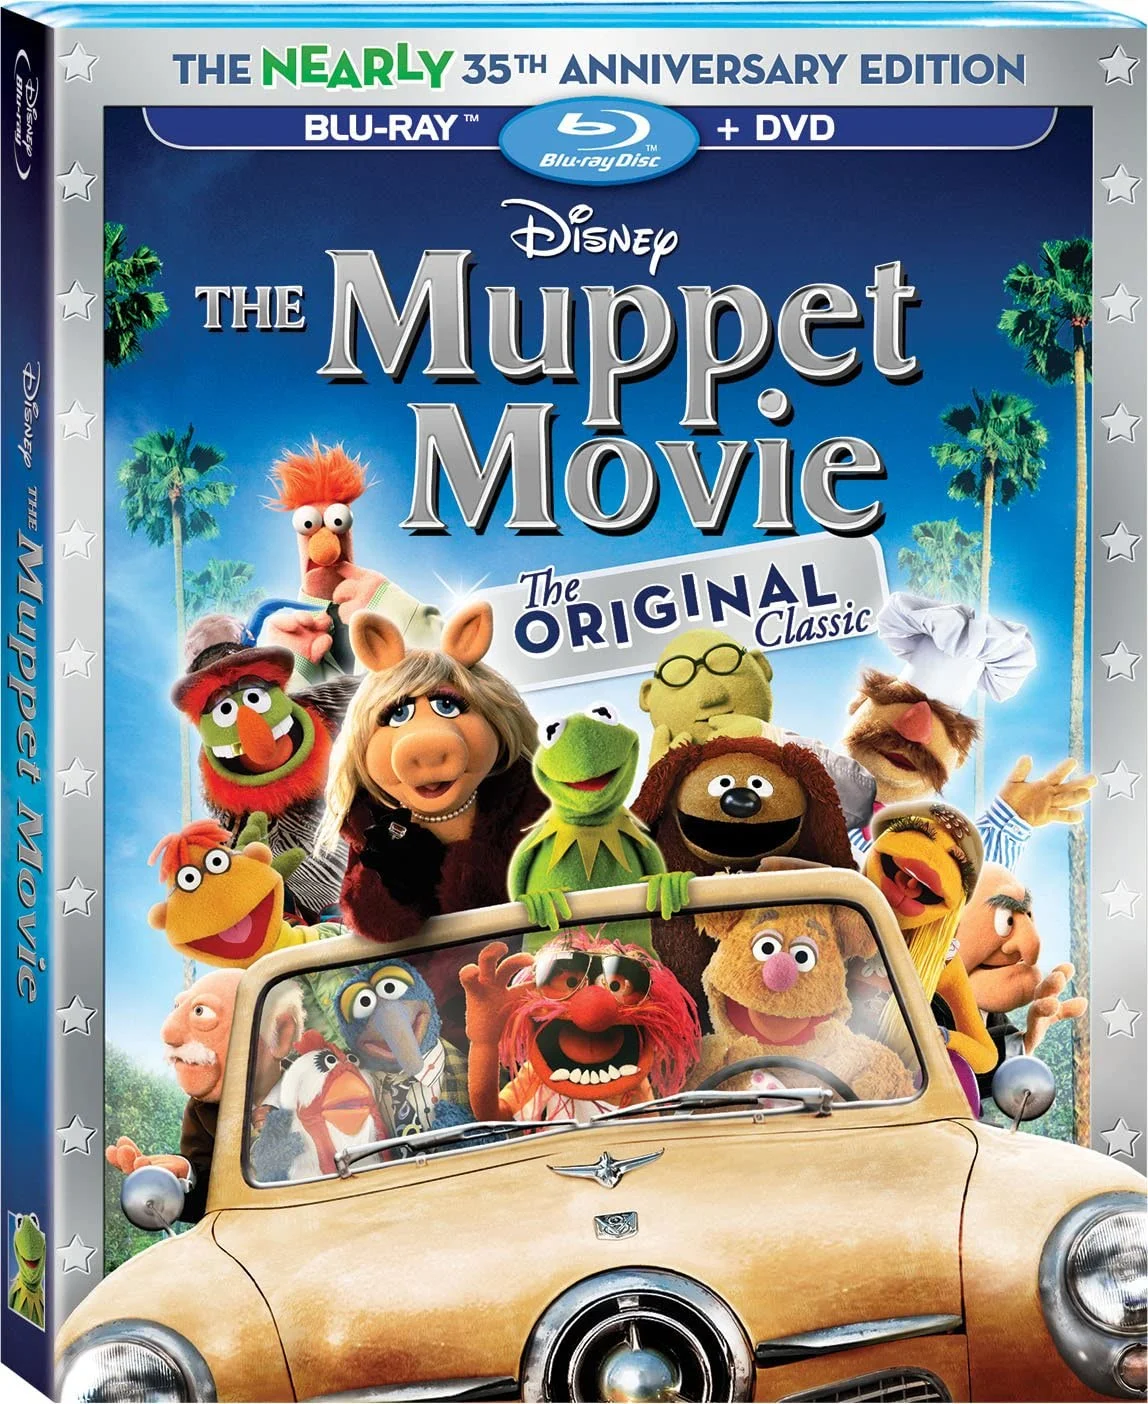 Muppet Movie: The Nearly 35th Anniversary Edition 2013 (Blu-ray) on MovieShack